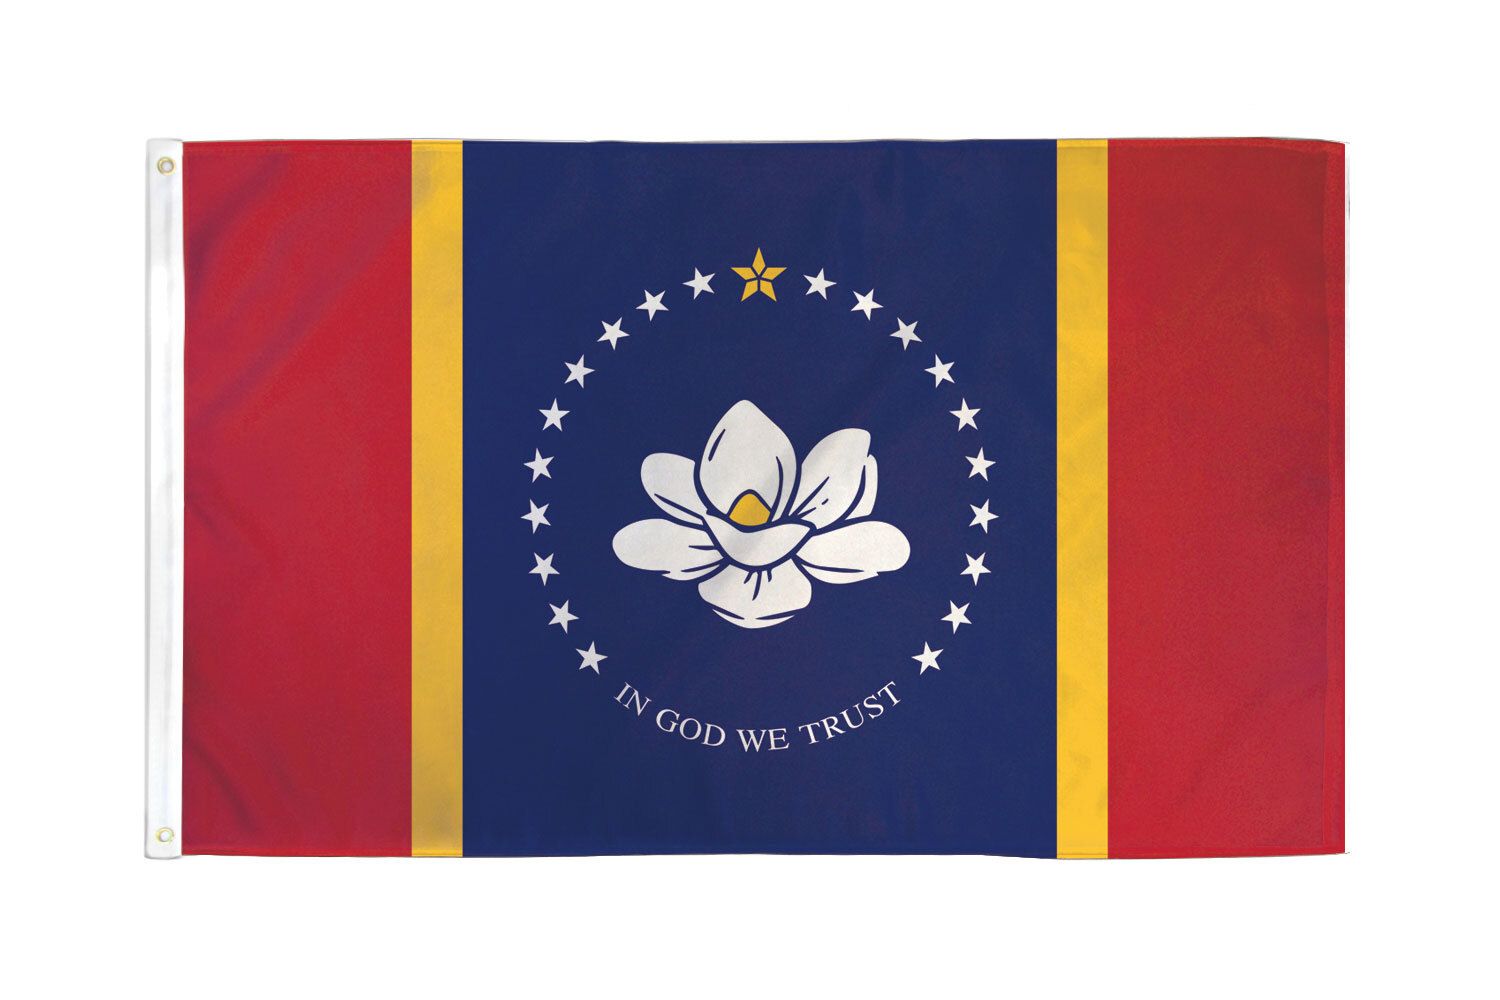 3x5 Mississippi Flag Polyester State Banner MS 3 x 5 New